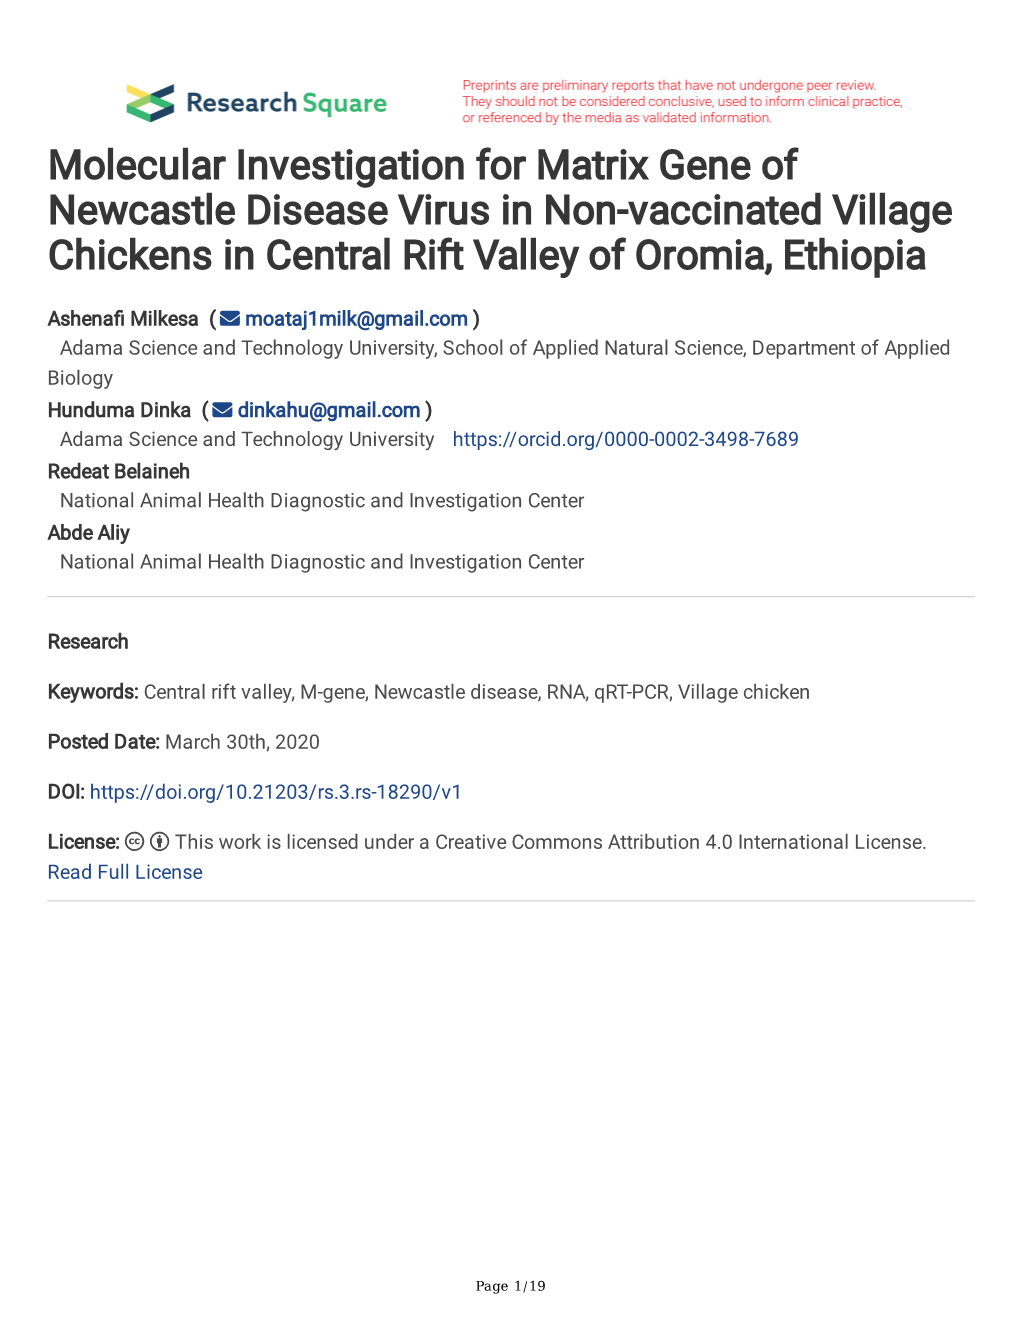 Molecular Investigation for Matrix Gene of Newcastle Disease Virus in Non-Vaccinated Village Chickens in Central Rift Valley of Oromia, Ethiopia